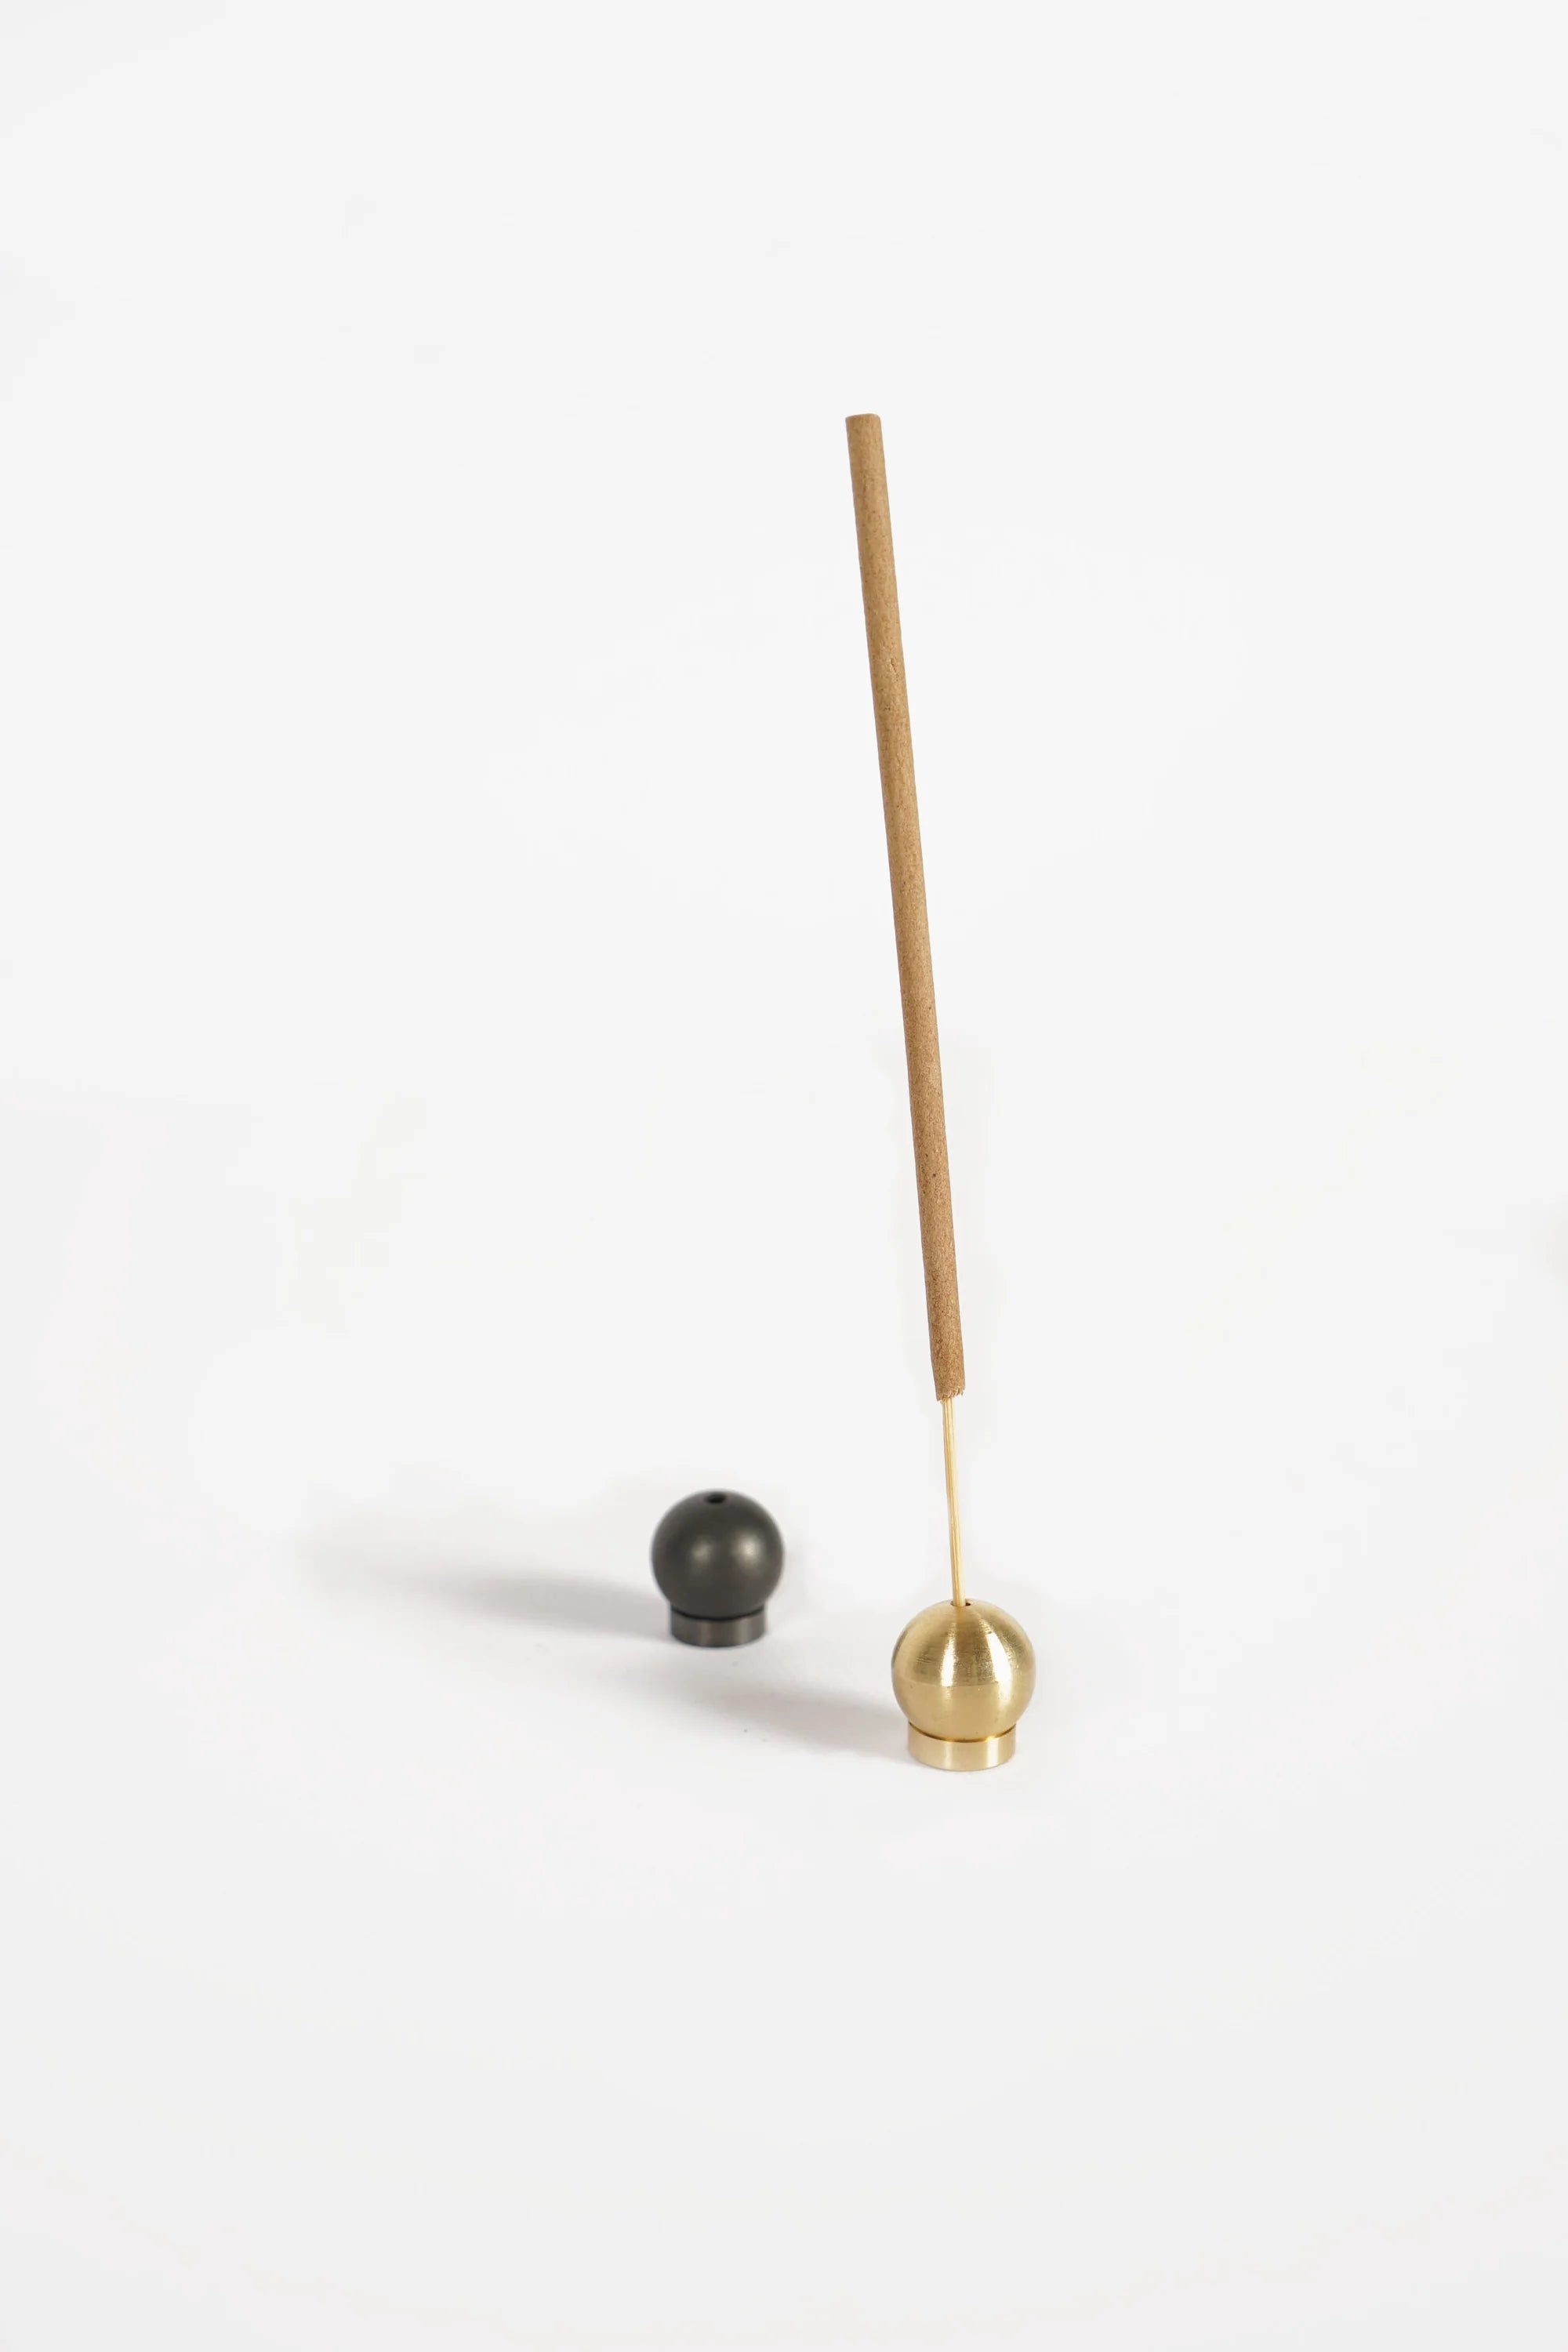 Incense Set "#03 Fruits flavor" & Plate & Incense Stand "Sphere"(You Save 10%)